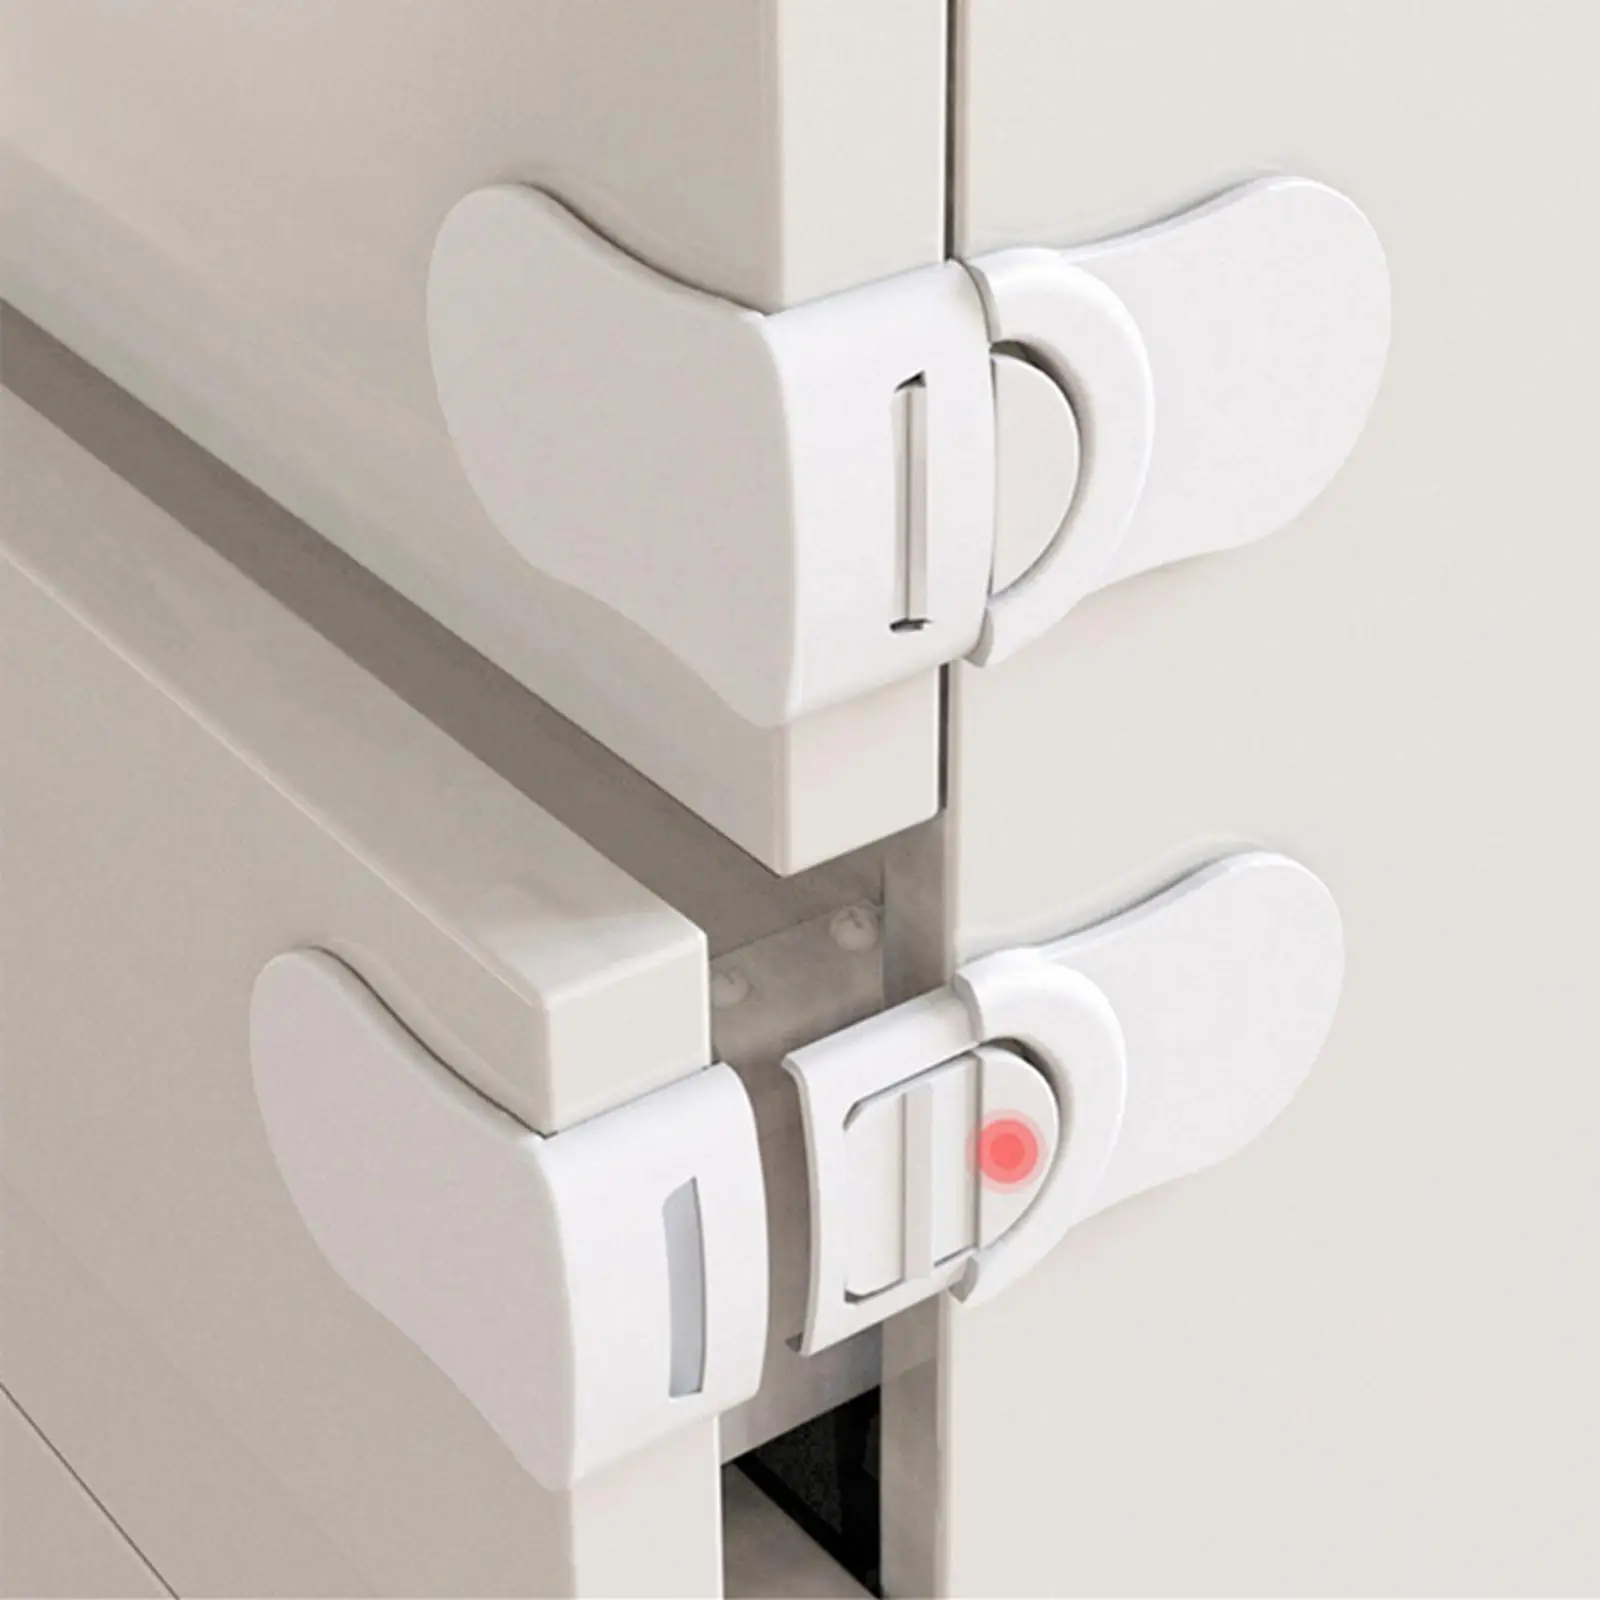 2x Houshold Baby Proofing Cabinet Locks Cabinet Locks for Bathroom Drawers